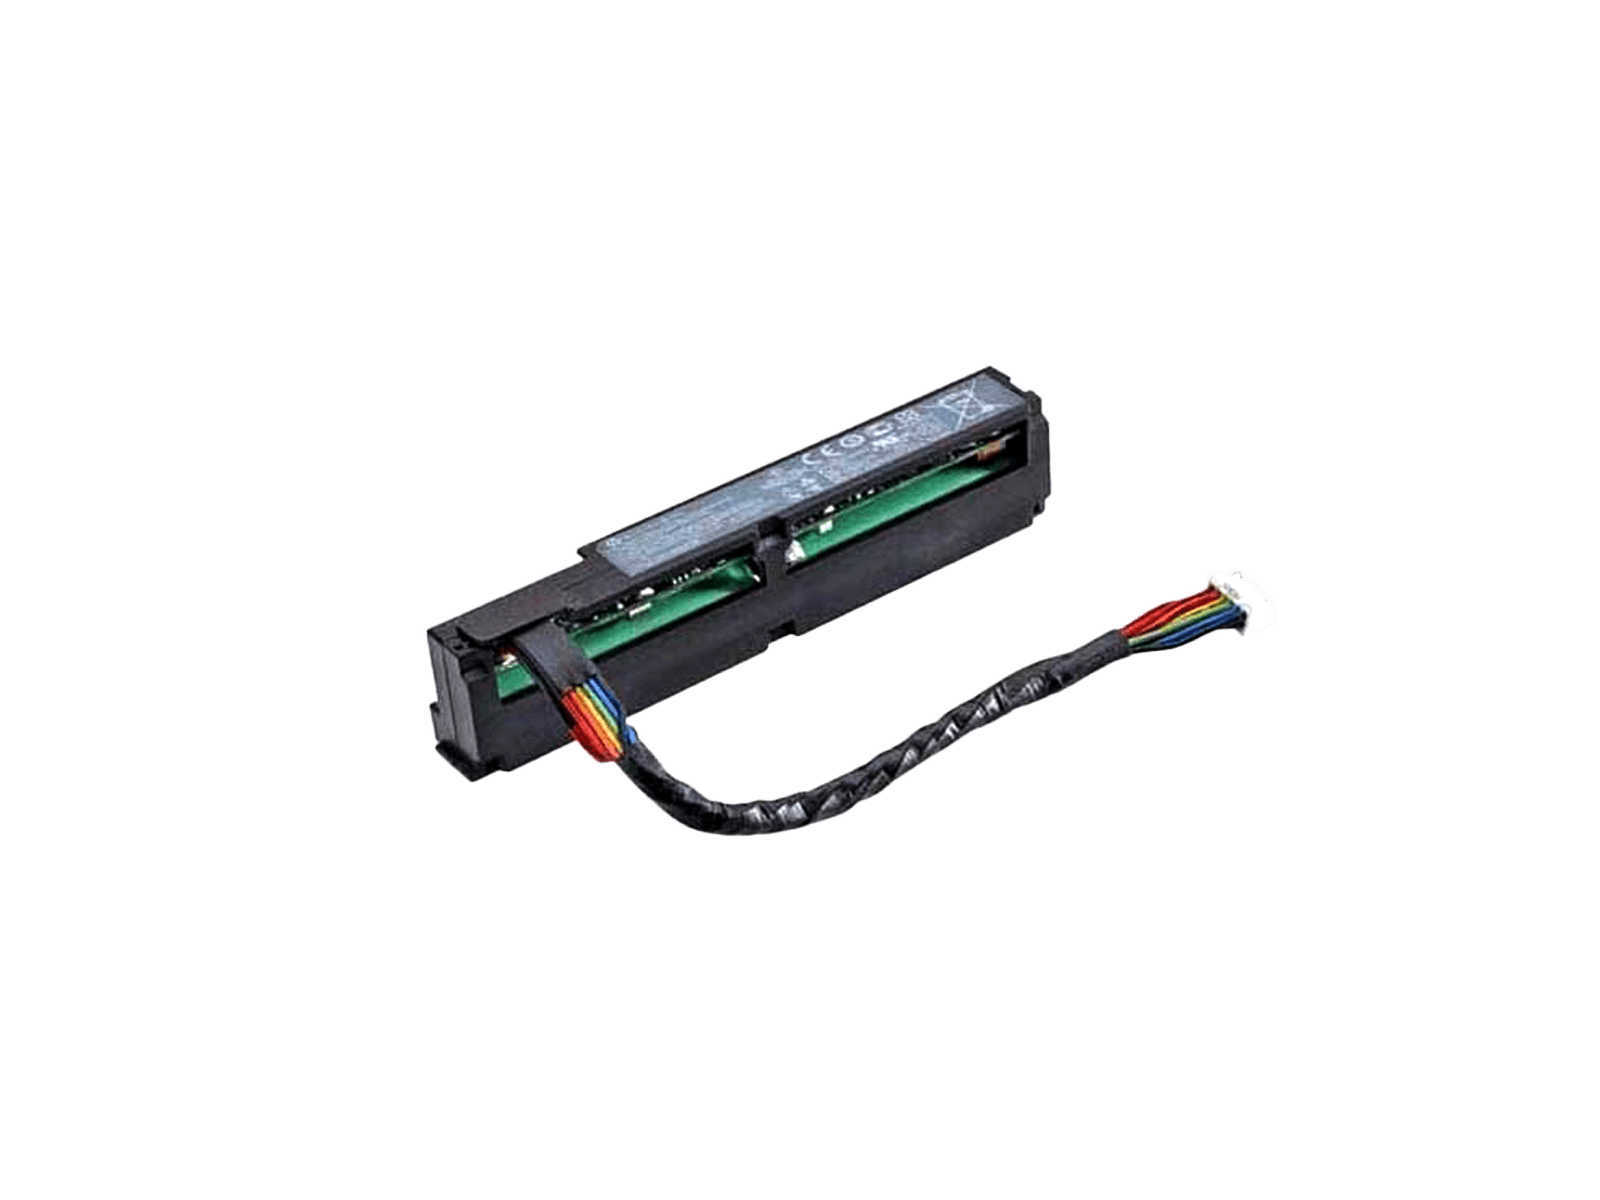 HPE P01366-B21 96W Smart Storage Battery with 145mm Cable Kit 871264-001 FBWC.